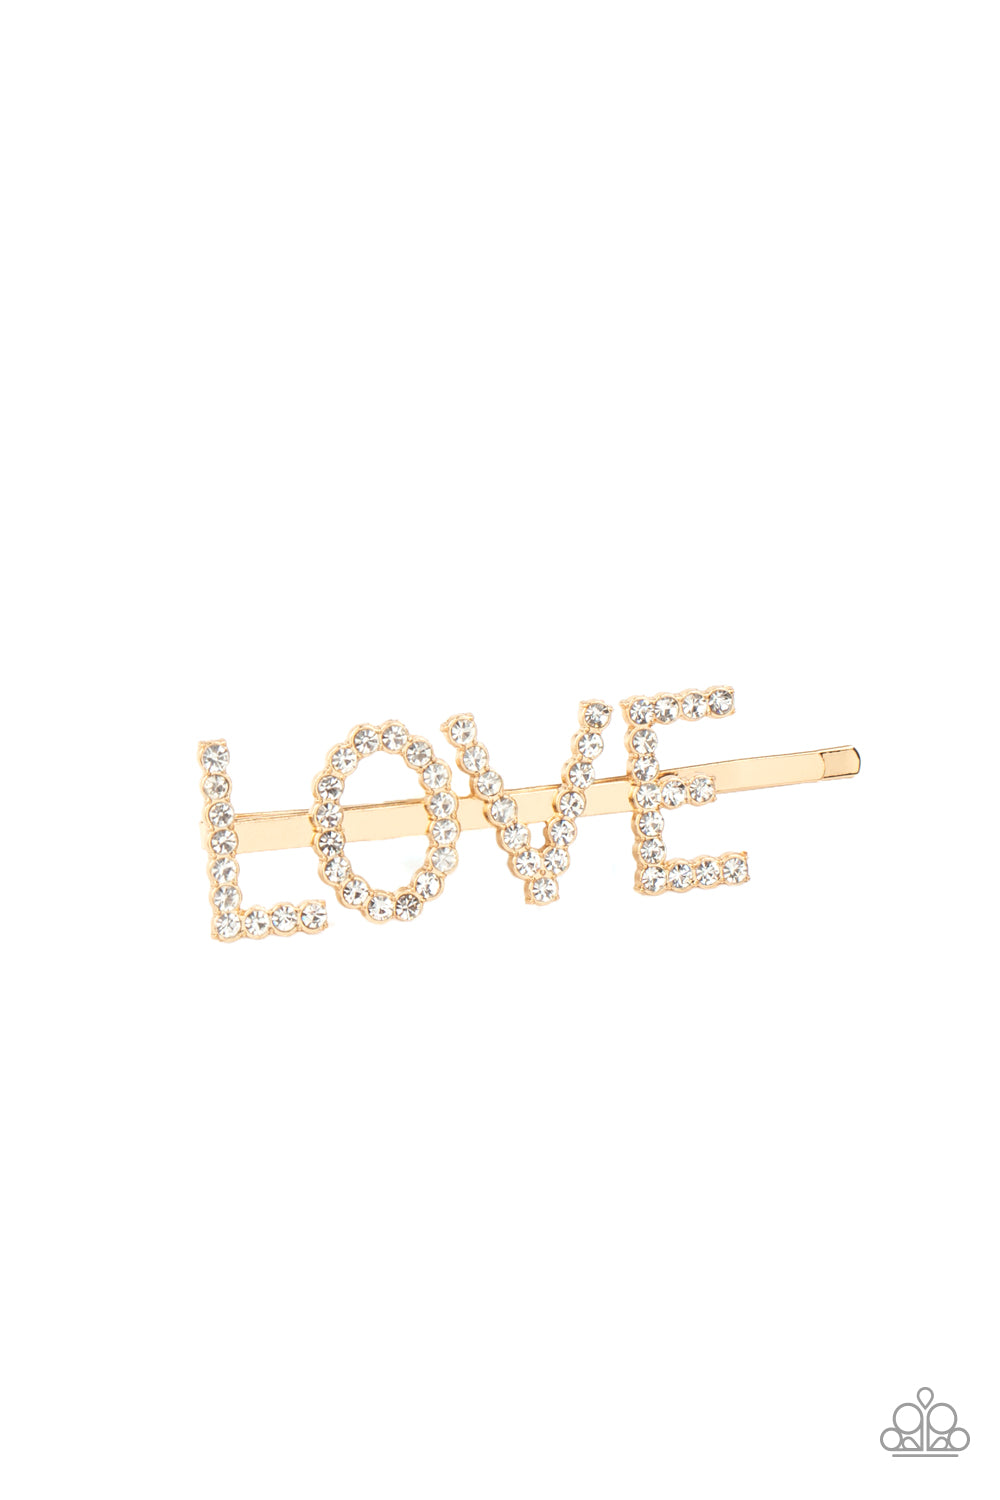 Paparazzi All You Need Is Love - Gold Hair Accessory